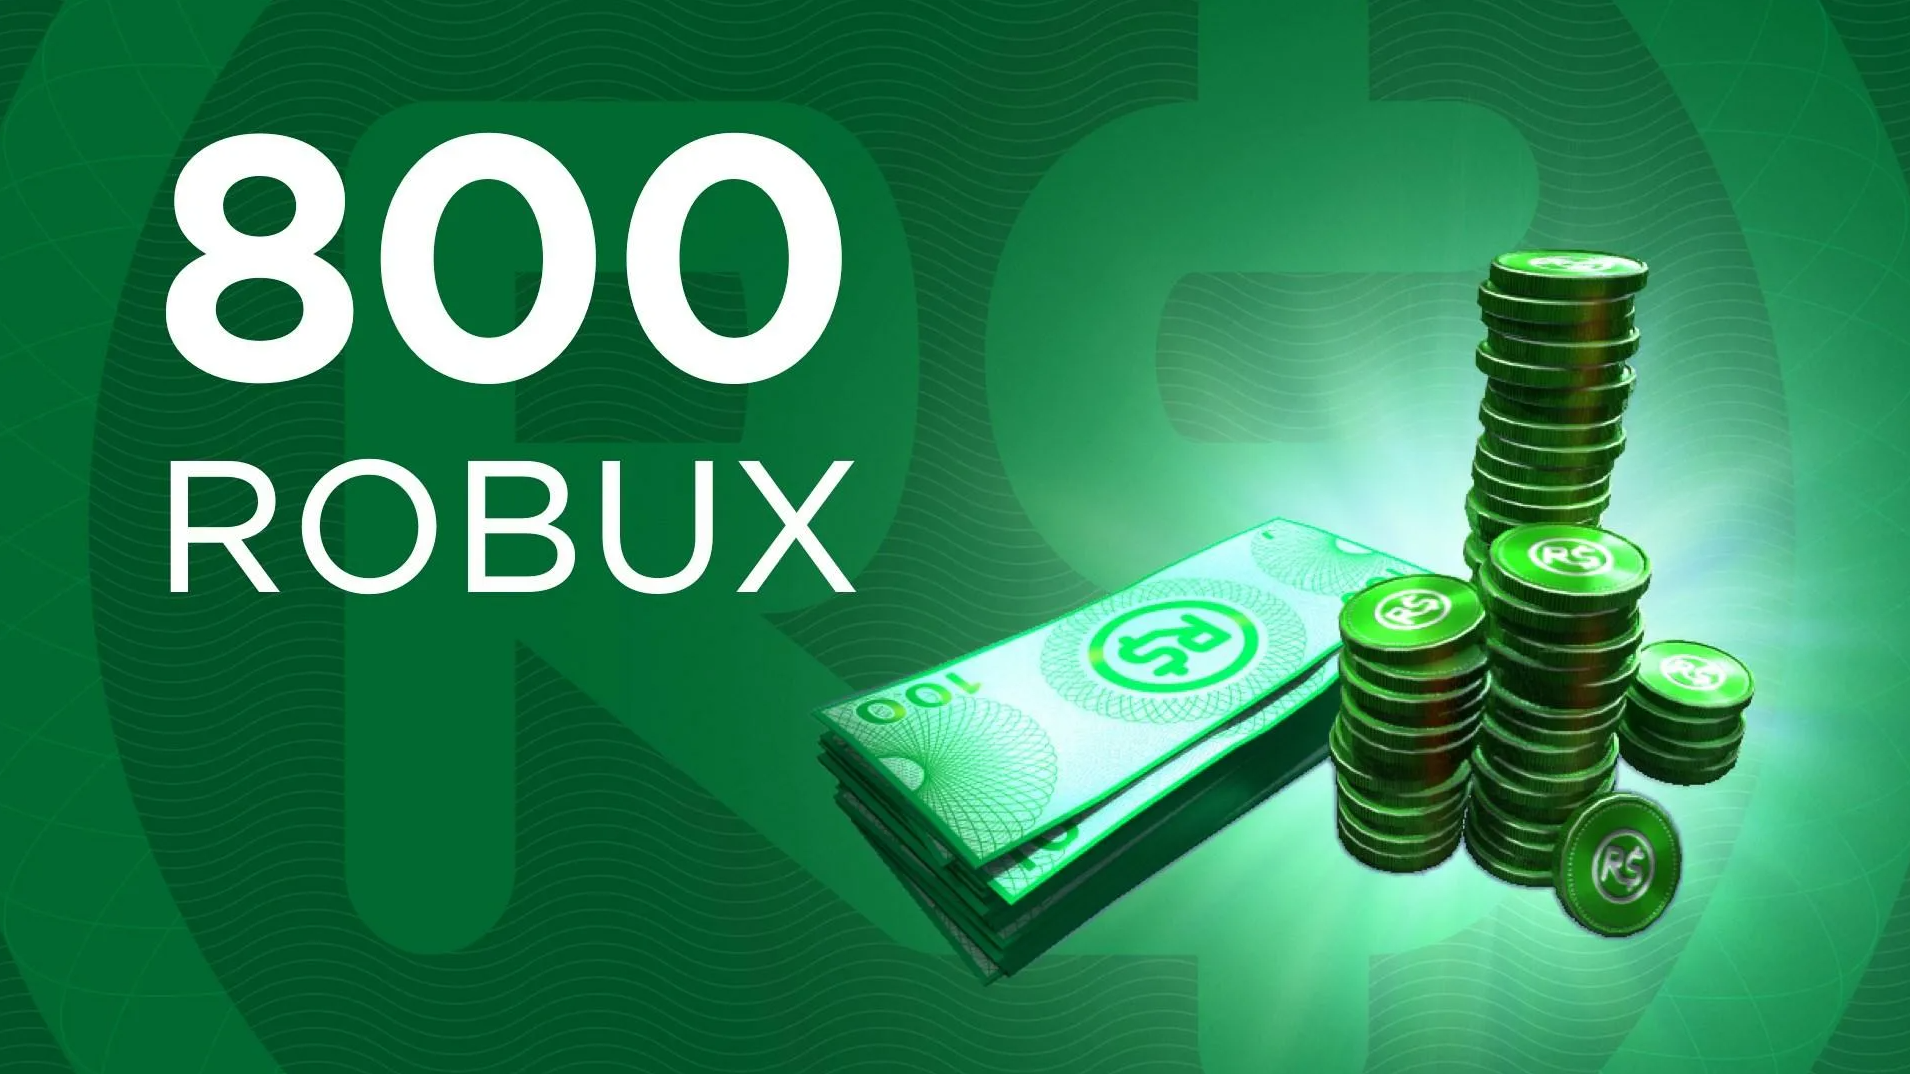 ✔️Roblox Gift Card 800 Robux✔️. Any region